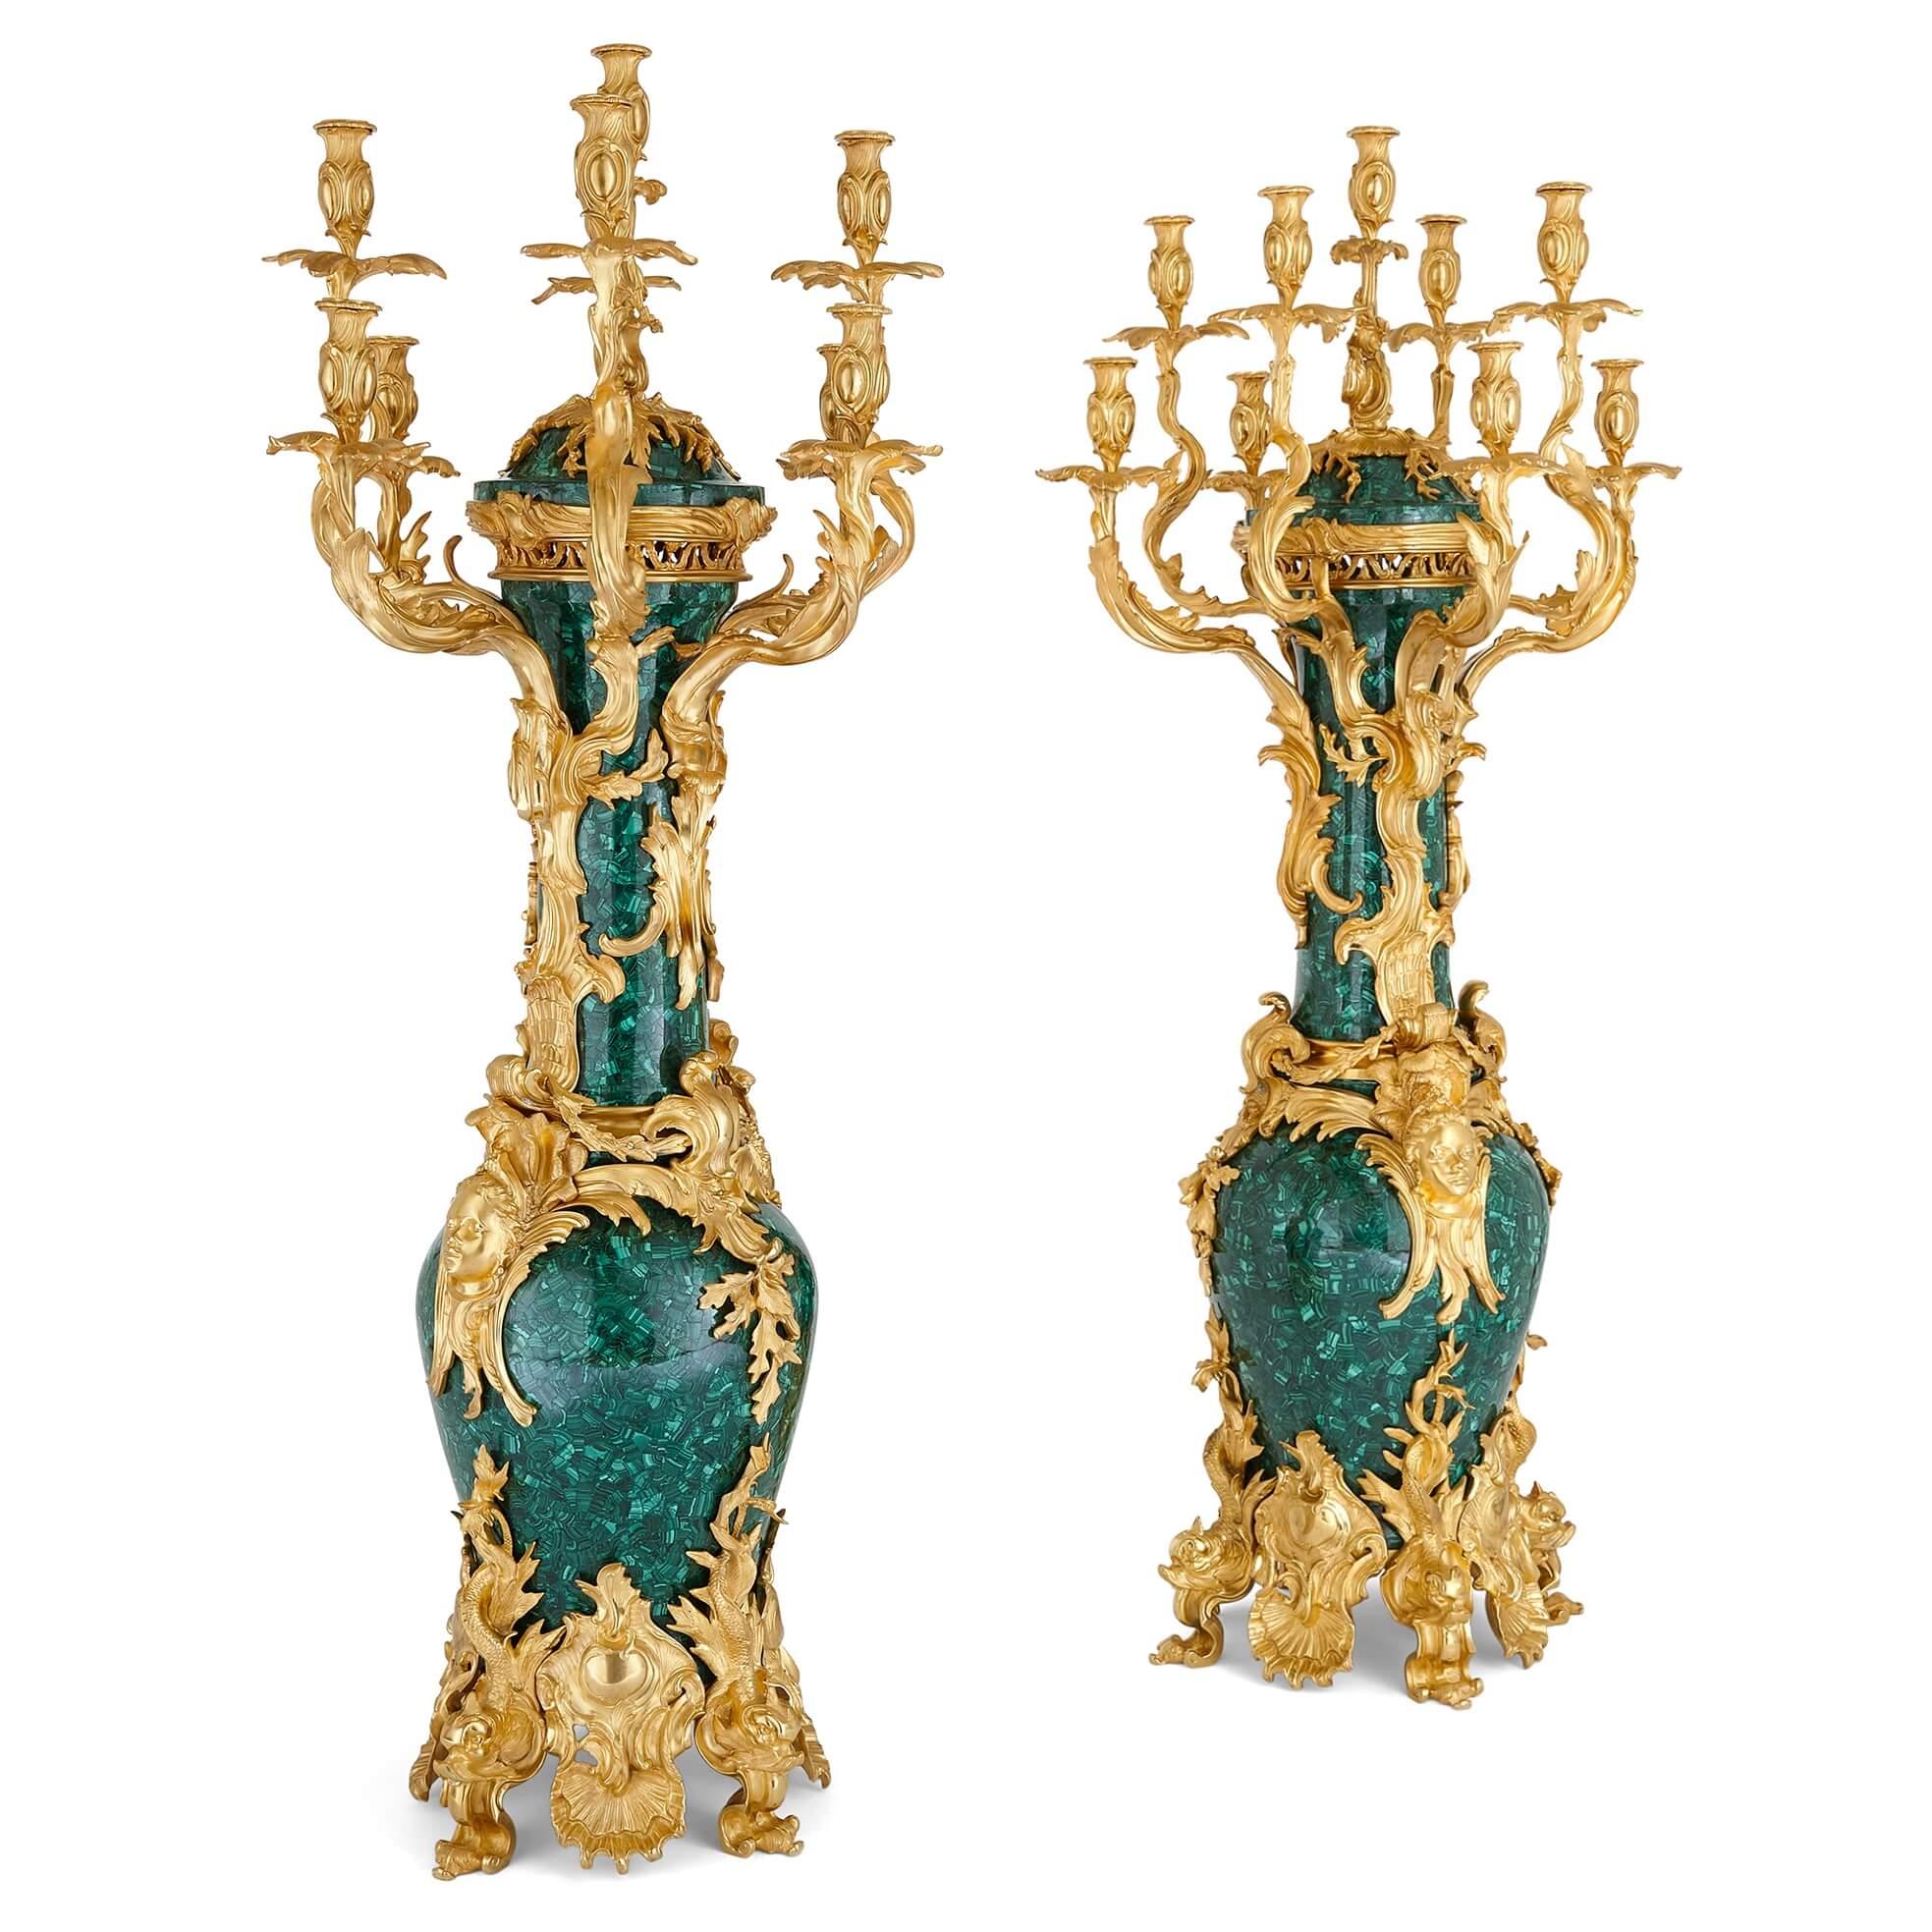 Pair of large Louis XV Rococo style ormolu mounted malachite candelabra
French, 20th Century
Measures: height 158, width 78cm, depth 72cm

This exceptional and very large pair of malachite and ormolu candelabra are designed in the sumptuous